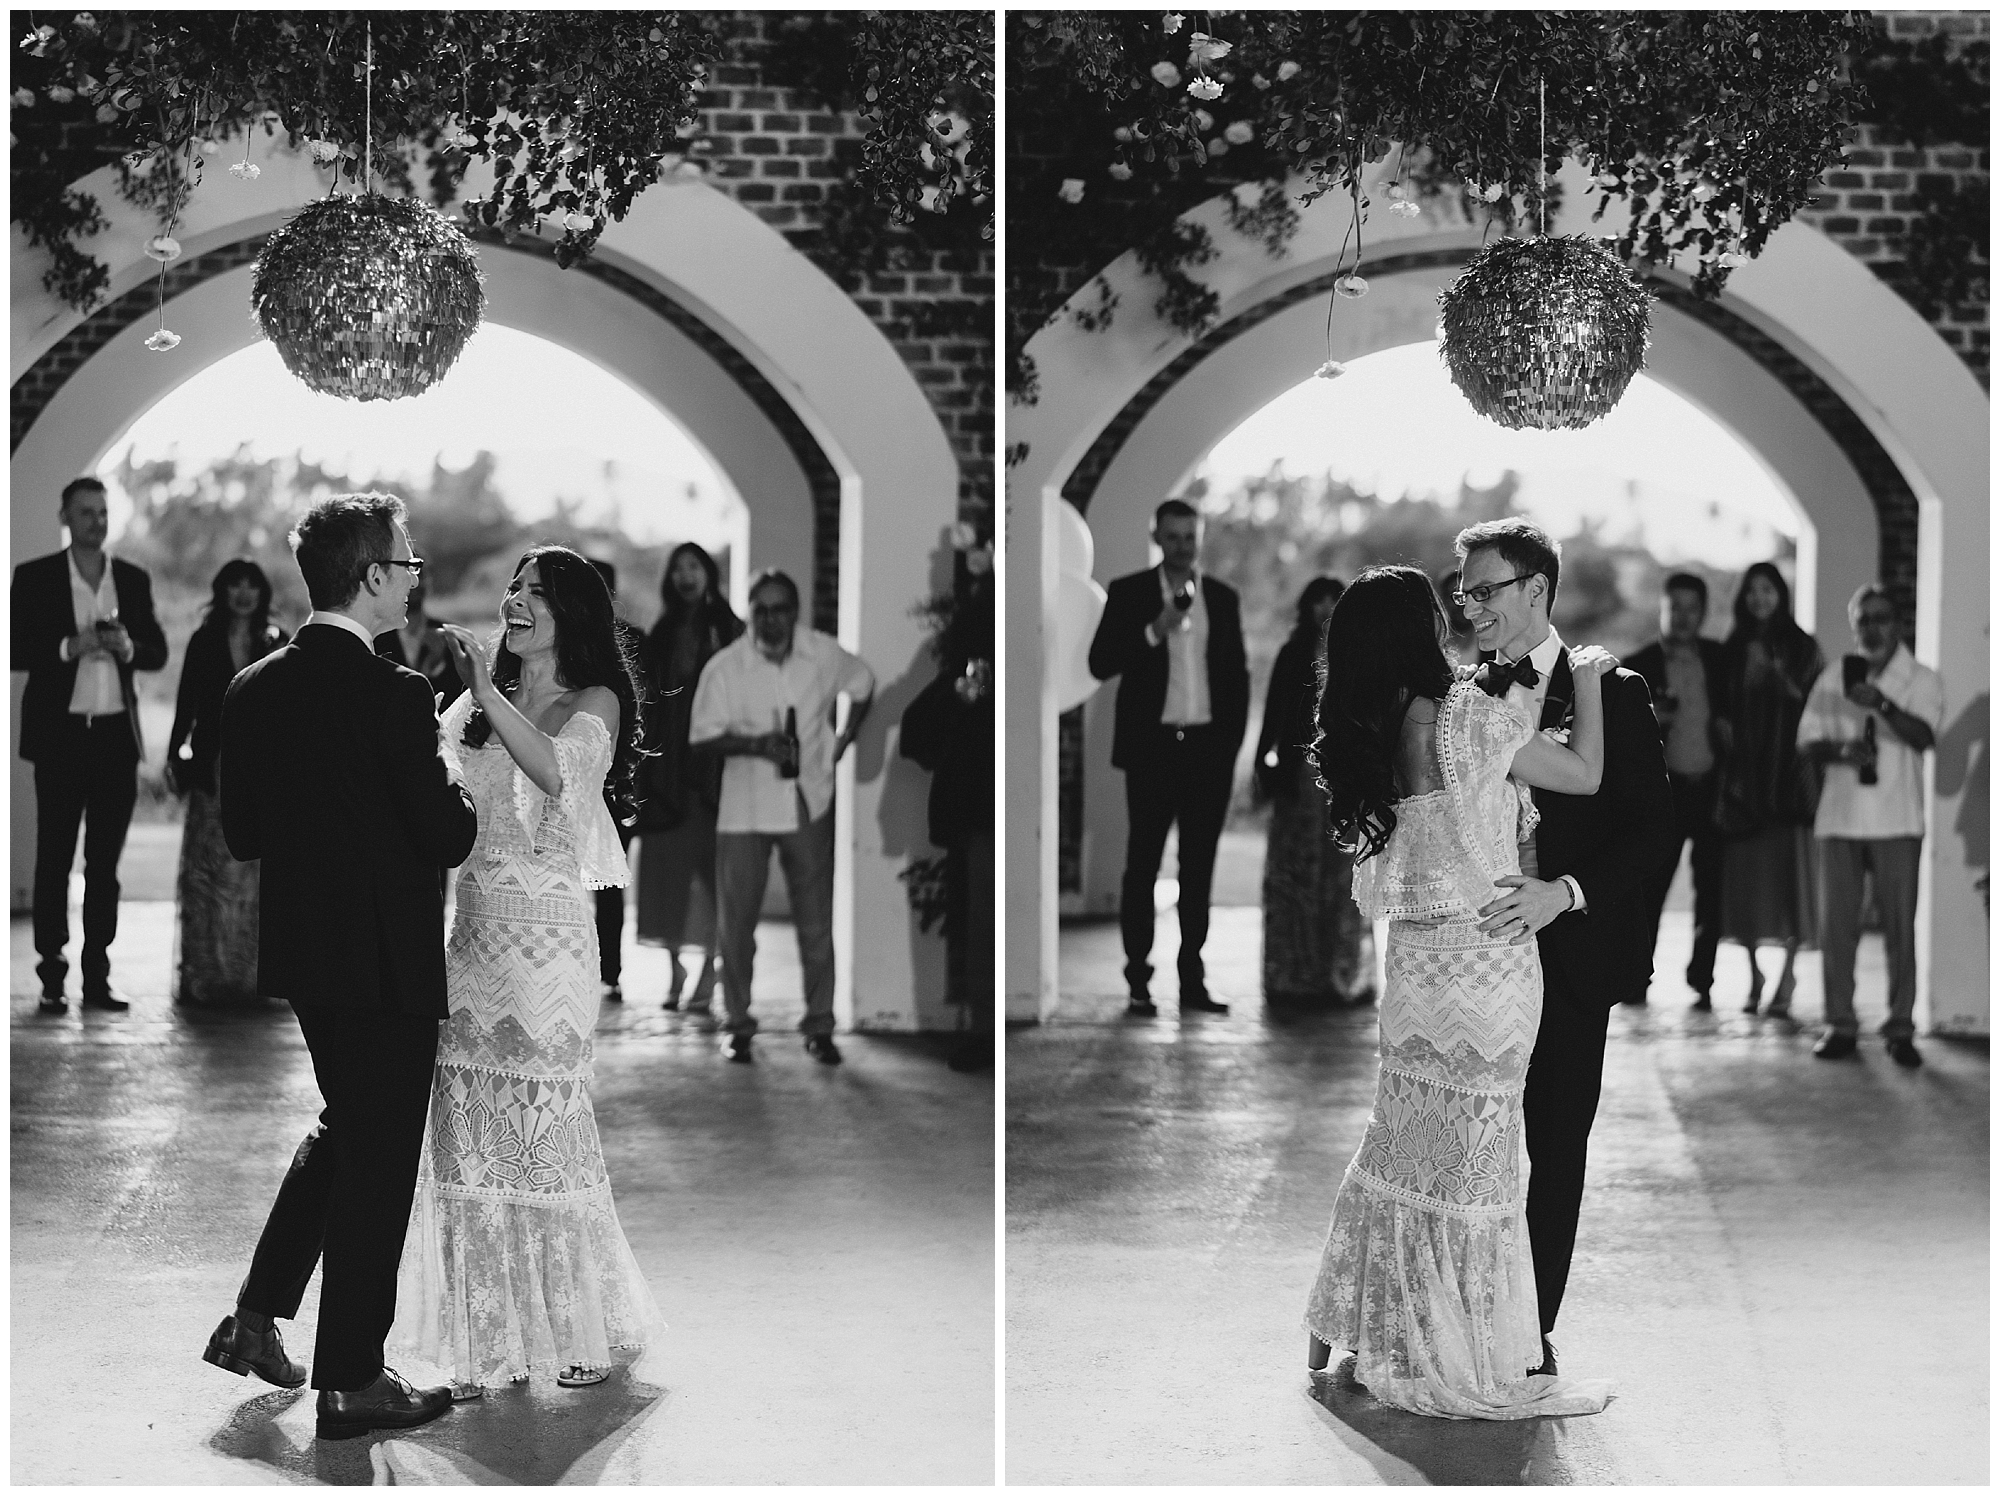 The first of many dances to come for this bride & groom at this beautiful Cabo wedding